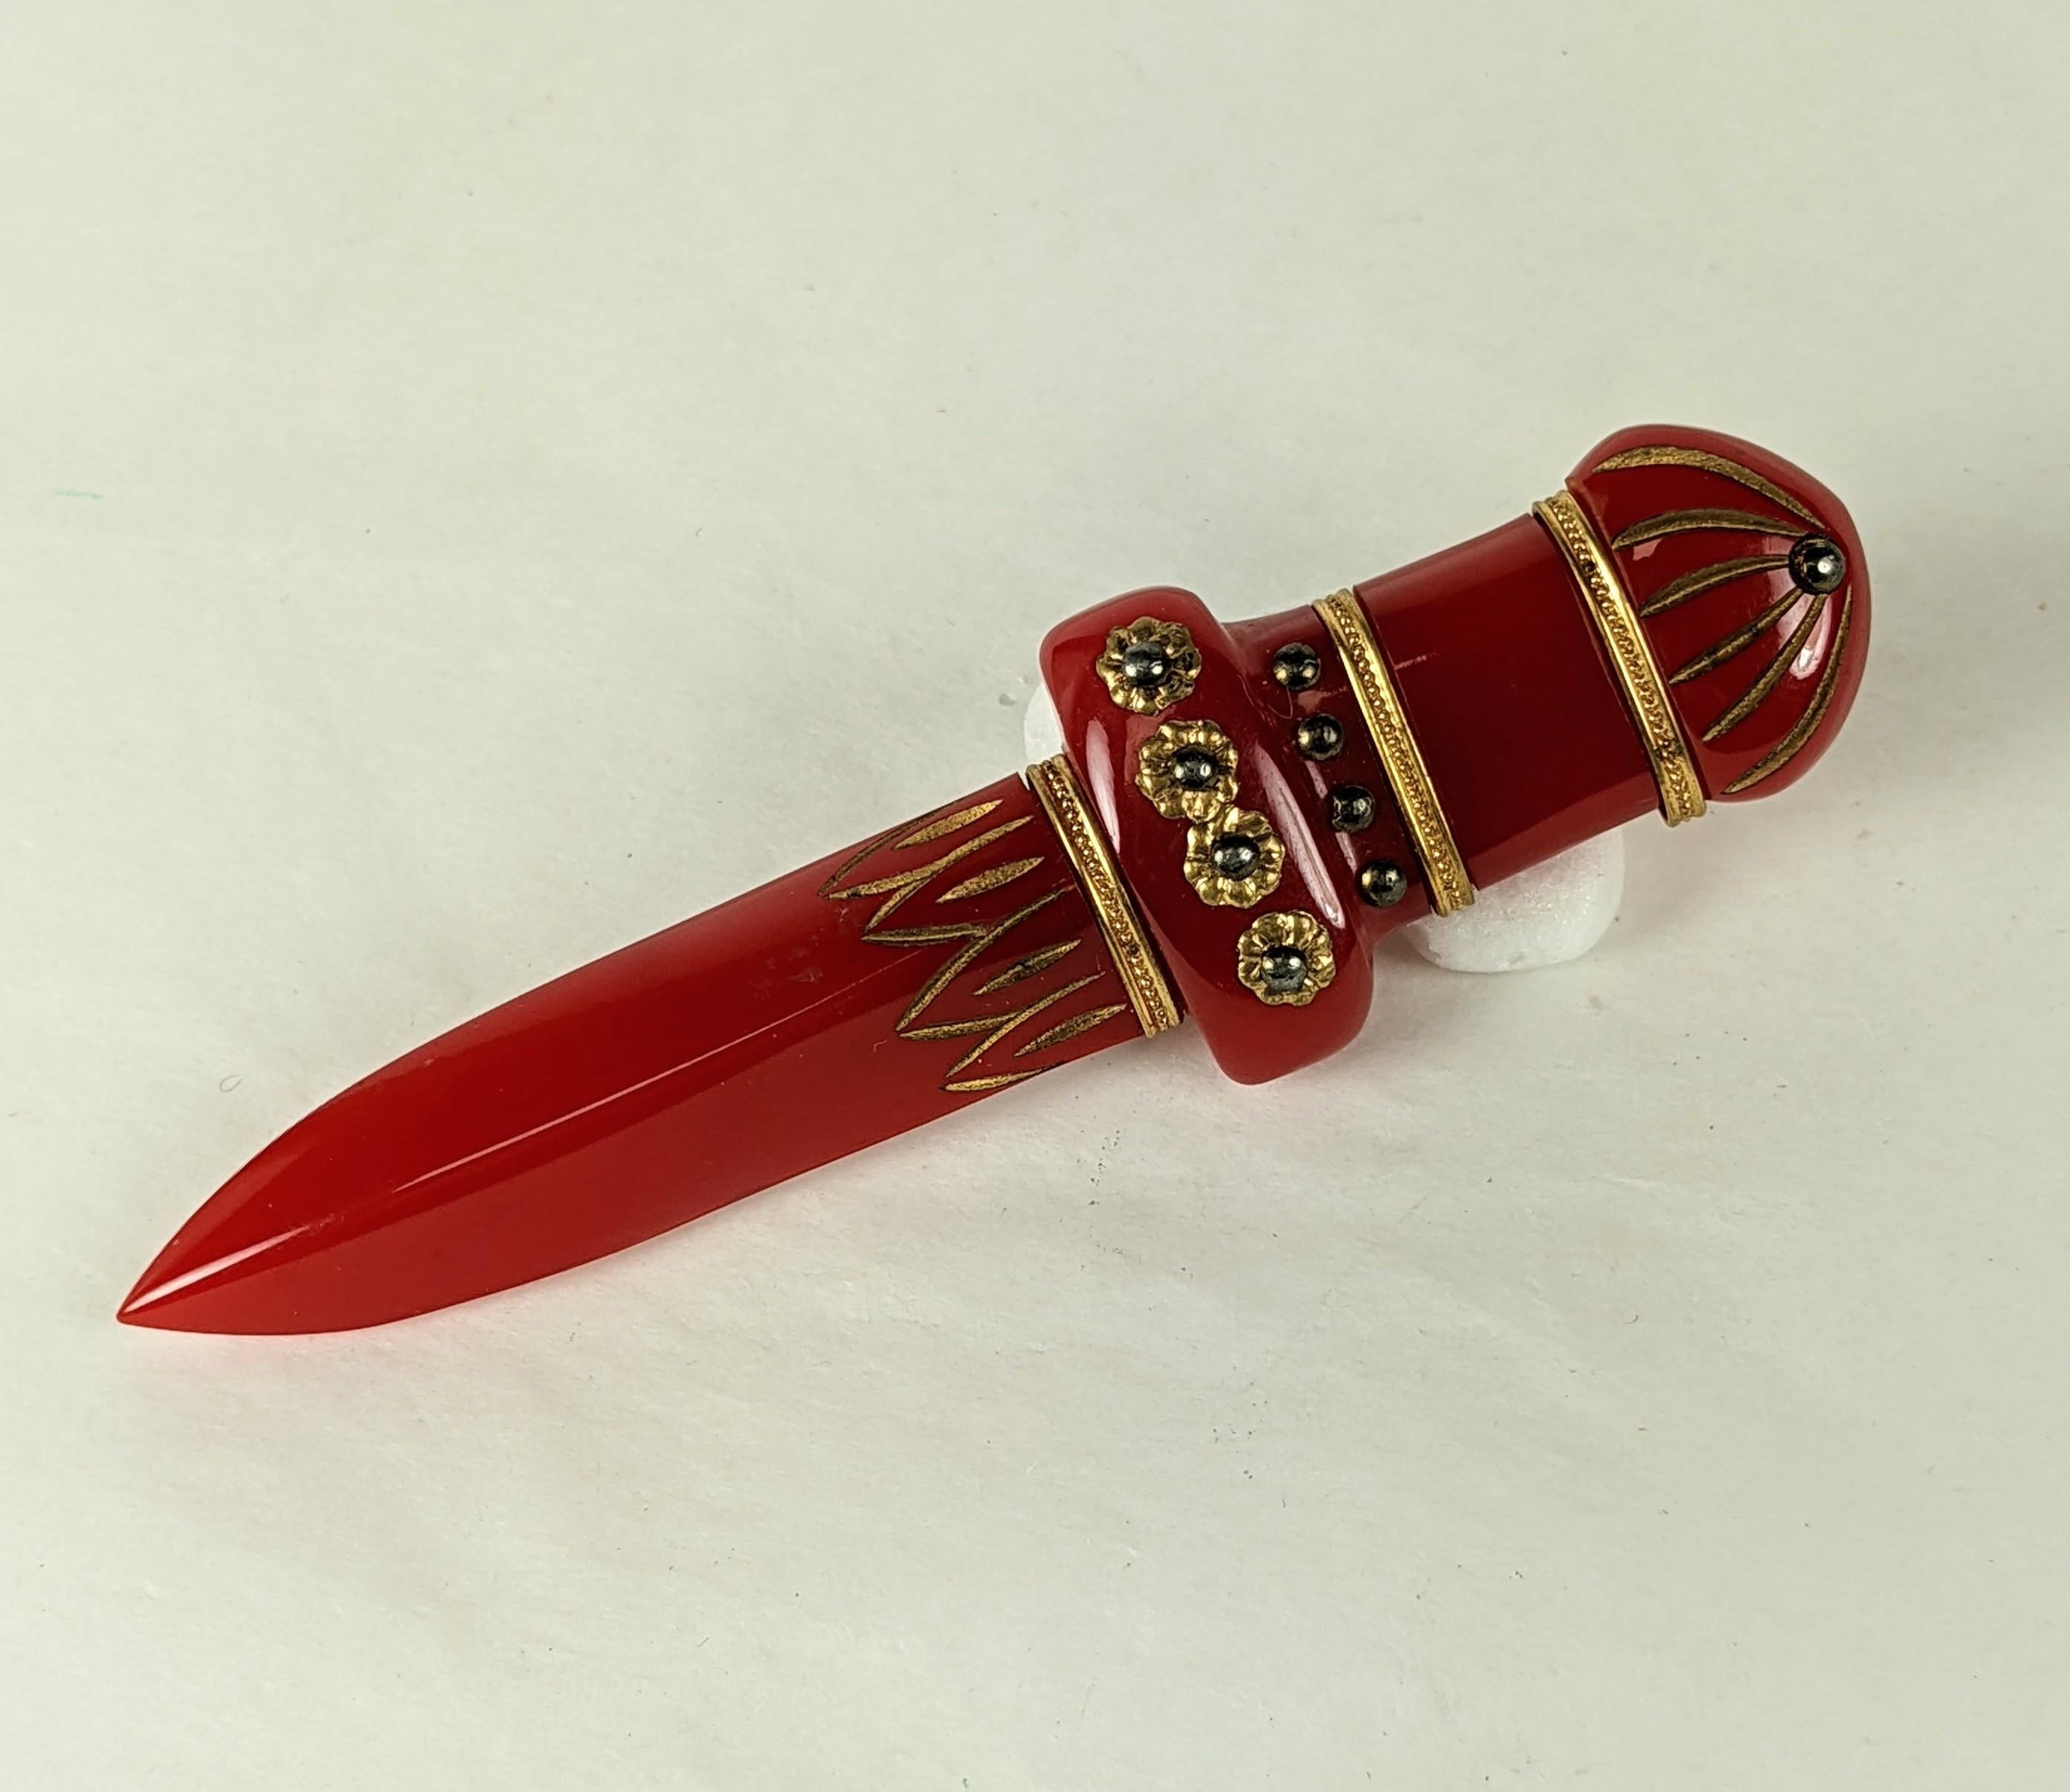 Large Art Deco Bakelite Sword Brooch from the 1930's. Hand carved with gilt filigree decoration and nail heads. Incised areas have gilt enamel decoration.  
4